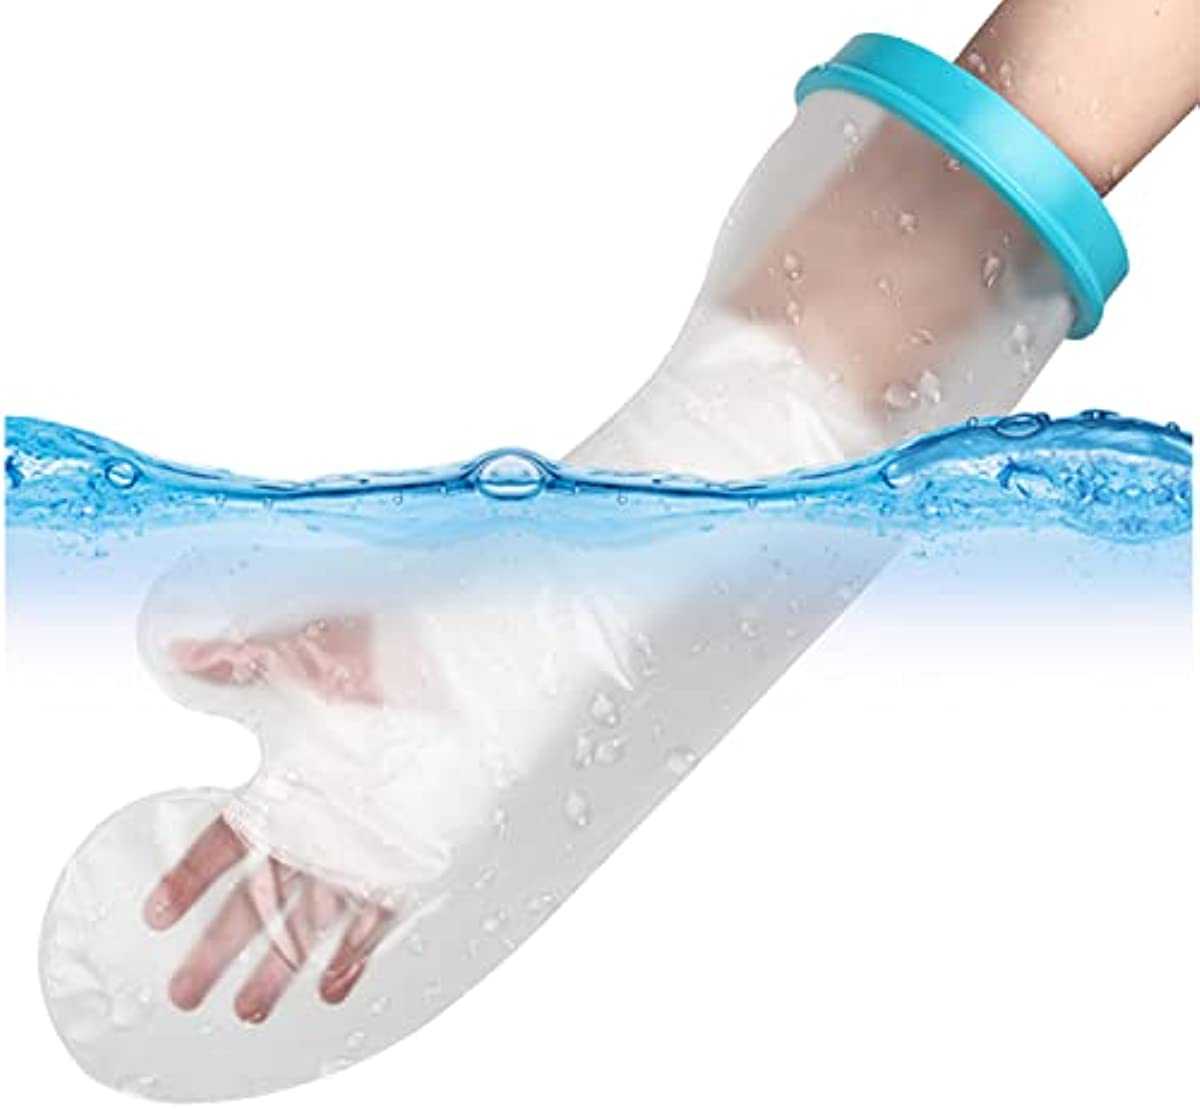 UpGoing 100{4a8a28cb6ba80f257956692db925e5c69915427c57237ad1775dcd88ffbf1165} Waterproof Arm Cast Cover for Shower Bath, Adult Reusable Arm Cast Sleeve Protector Bag Covers for Shower Wound Arm, Hands, Wrists, Elbow, Finger [2022 New Upgraded]